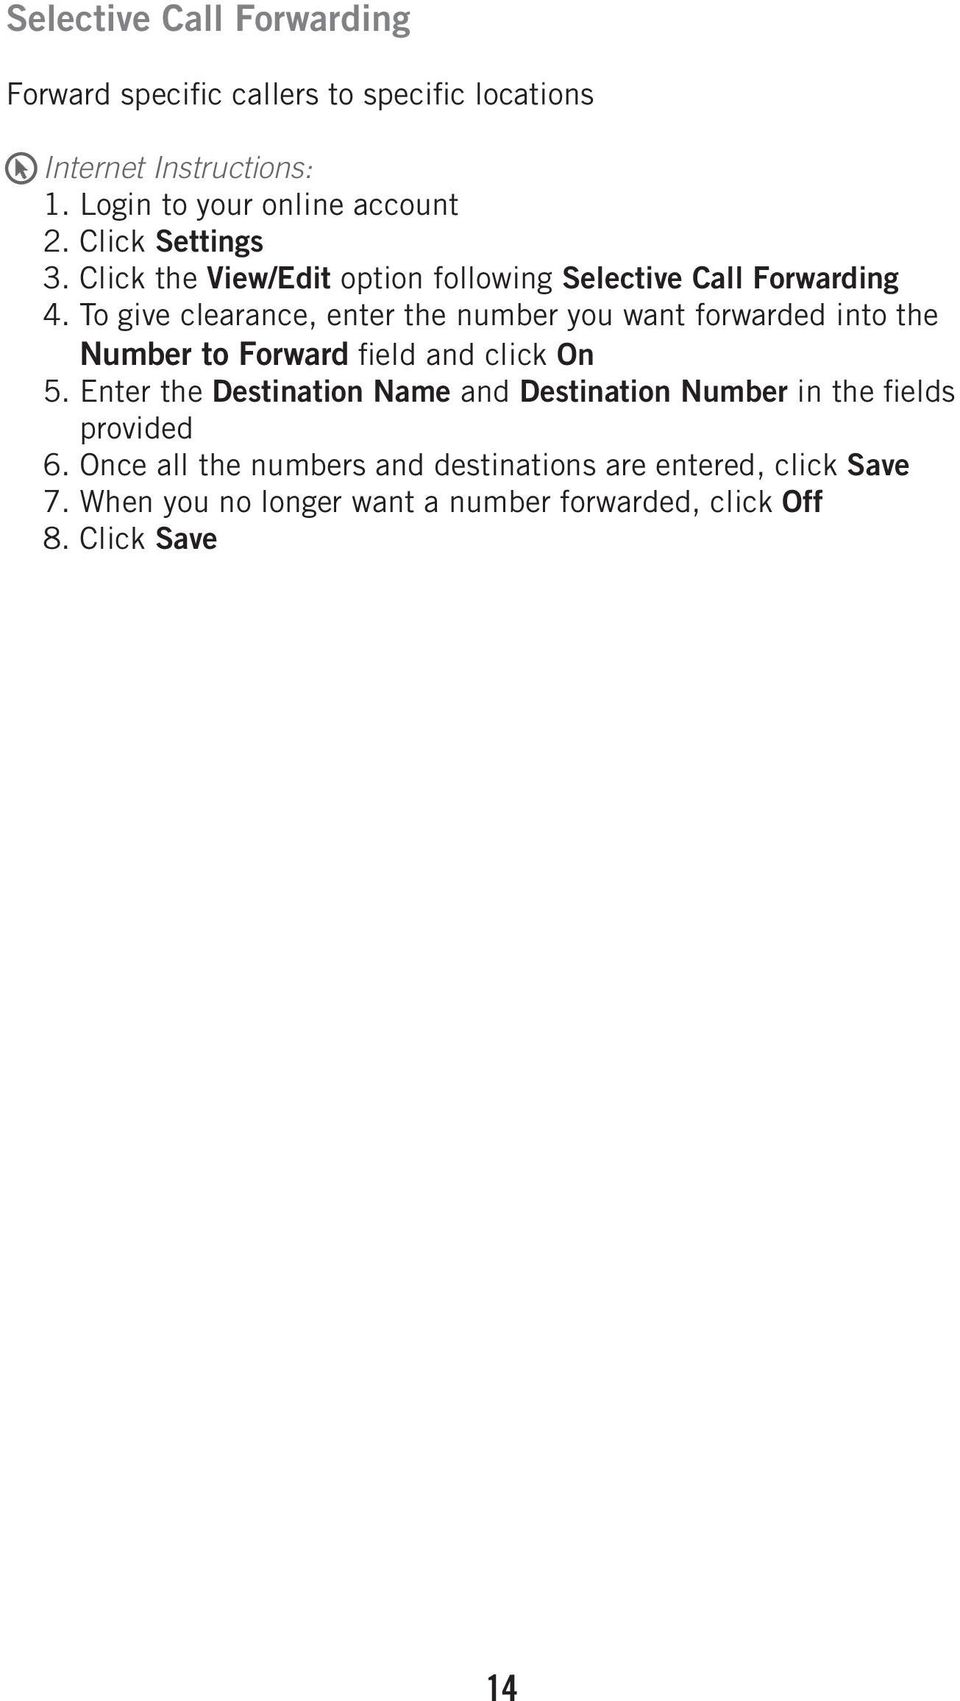 To give clearance, enter the number you want forwarded into the Number to Forward field and click On 5.